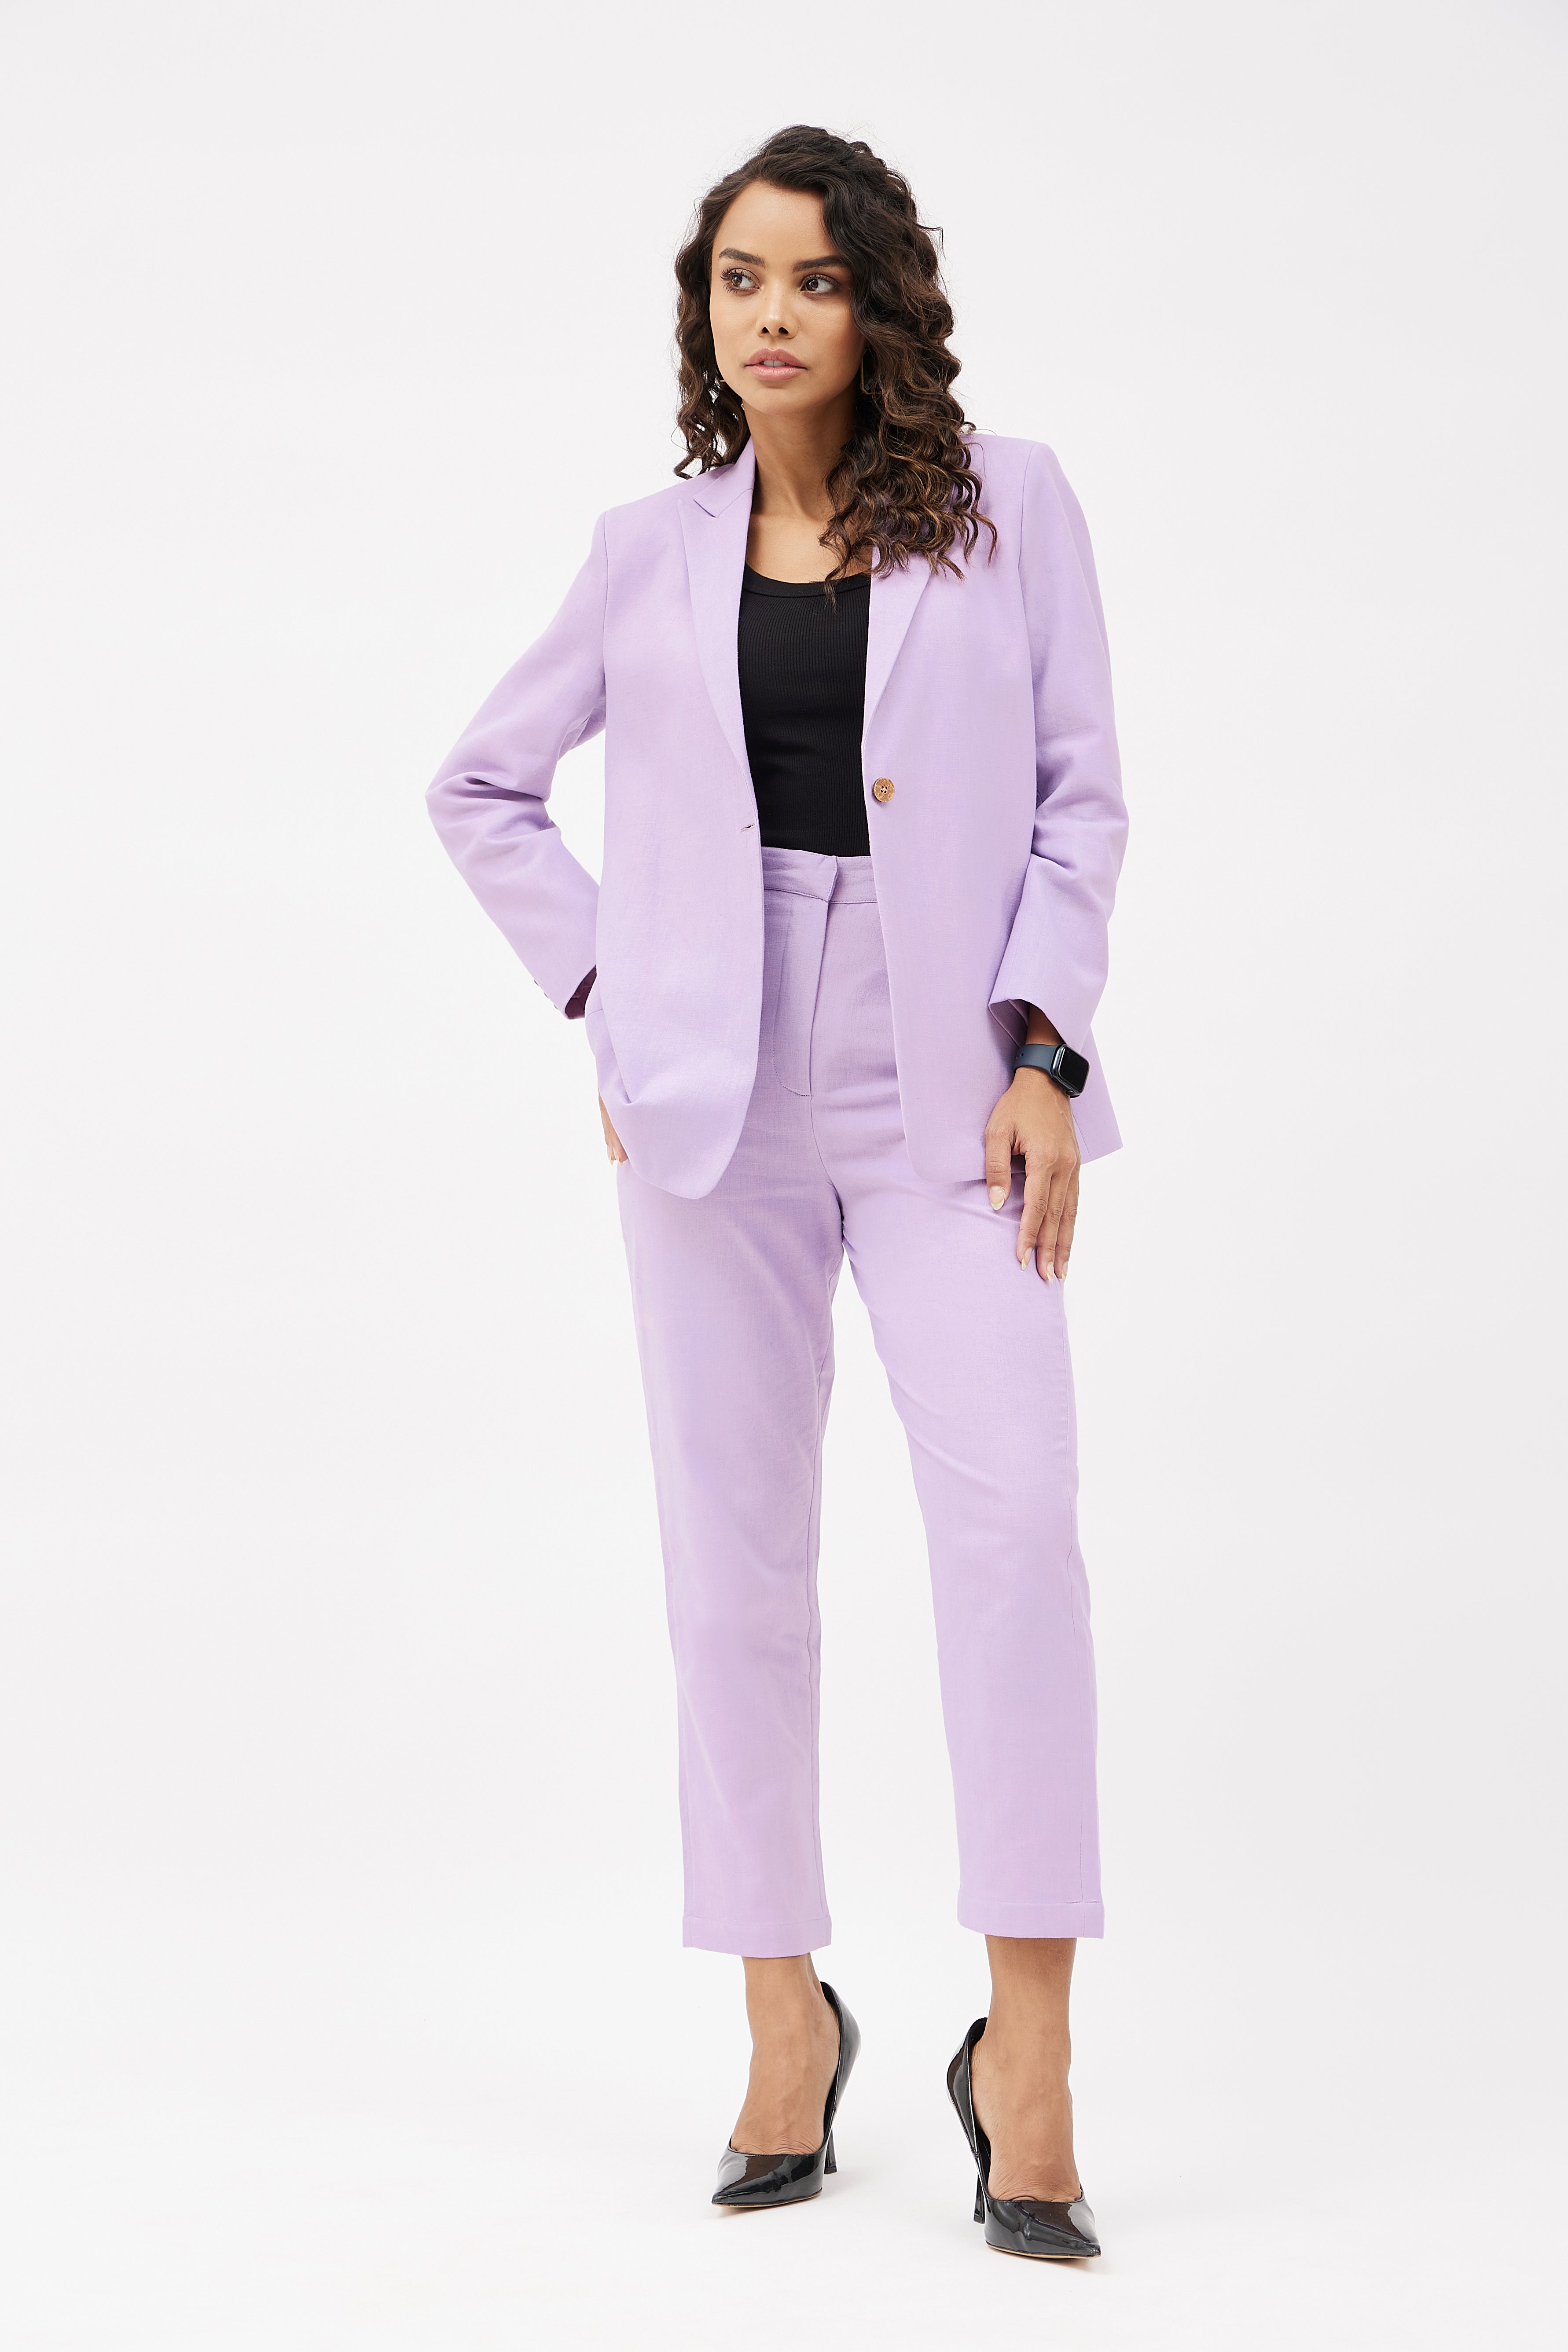 The Best Way Of Wearing Elegant Trouser Suits For Weddings  The Wedding  Avenue